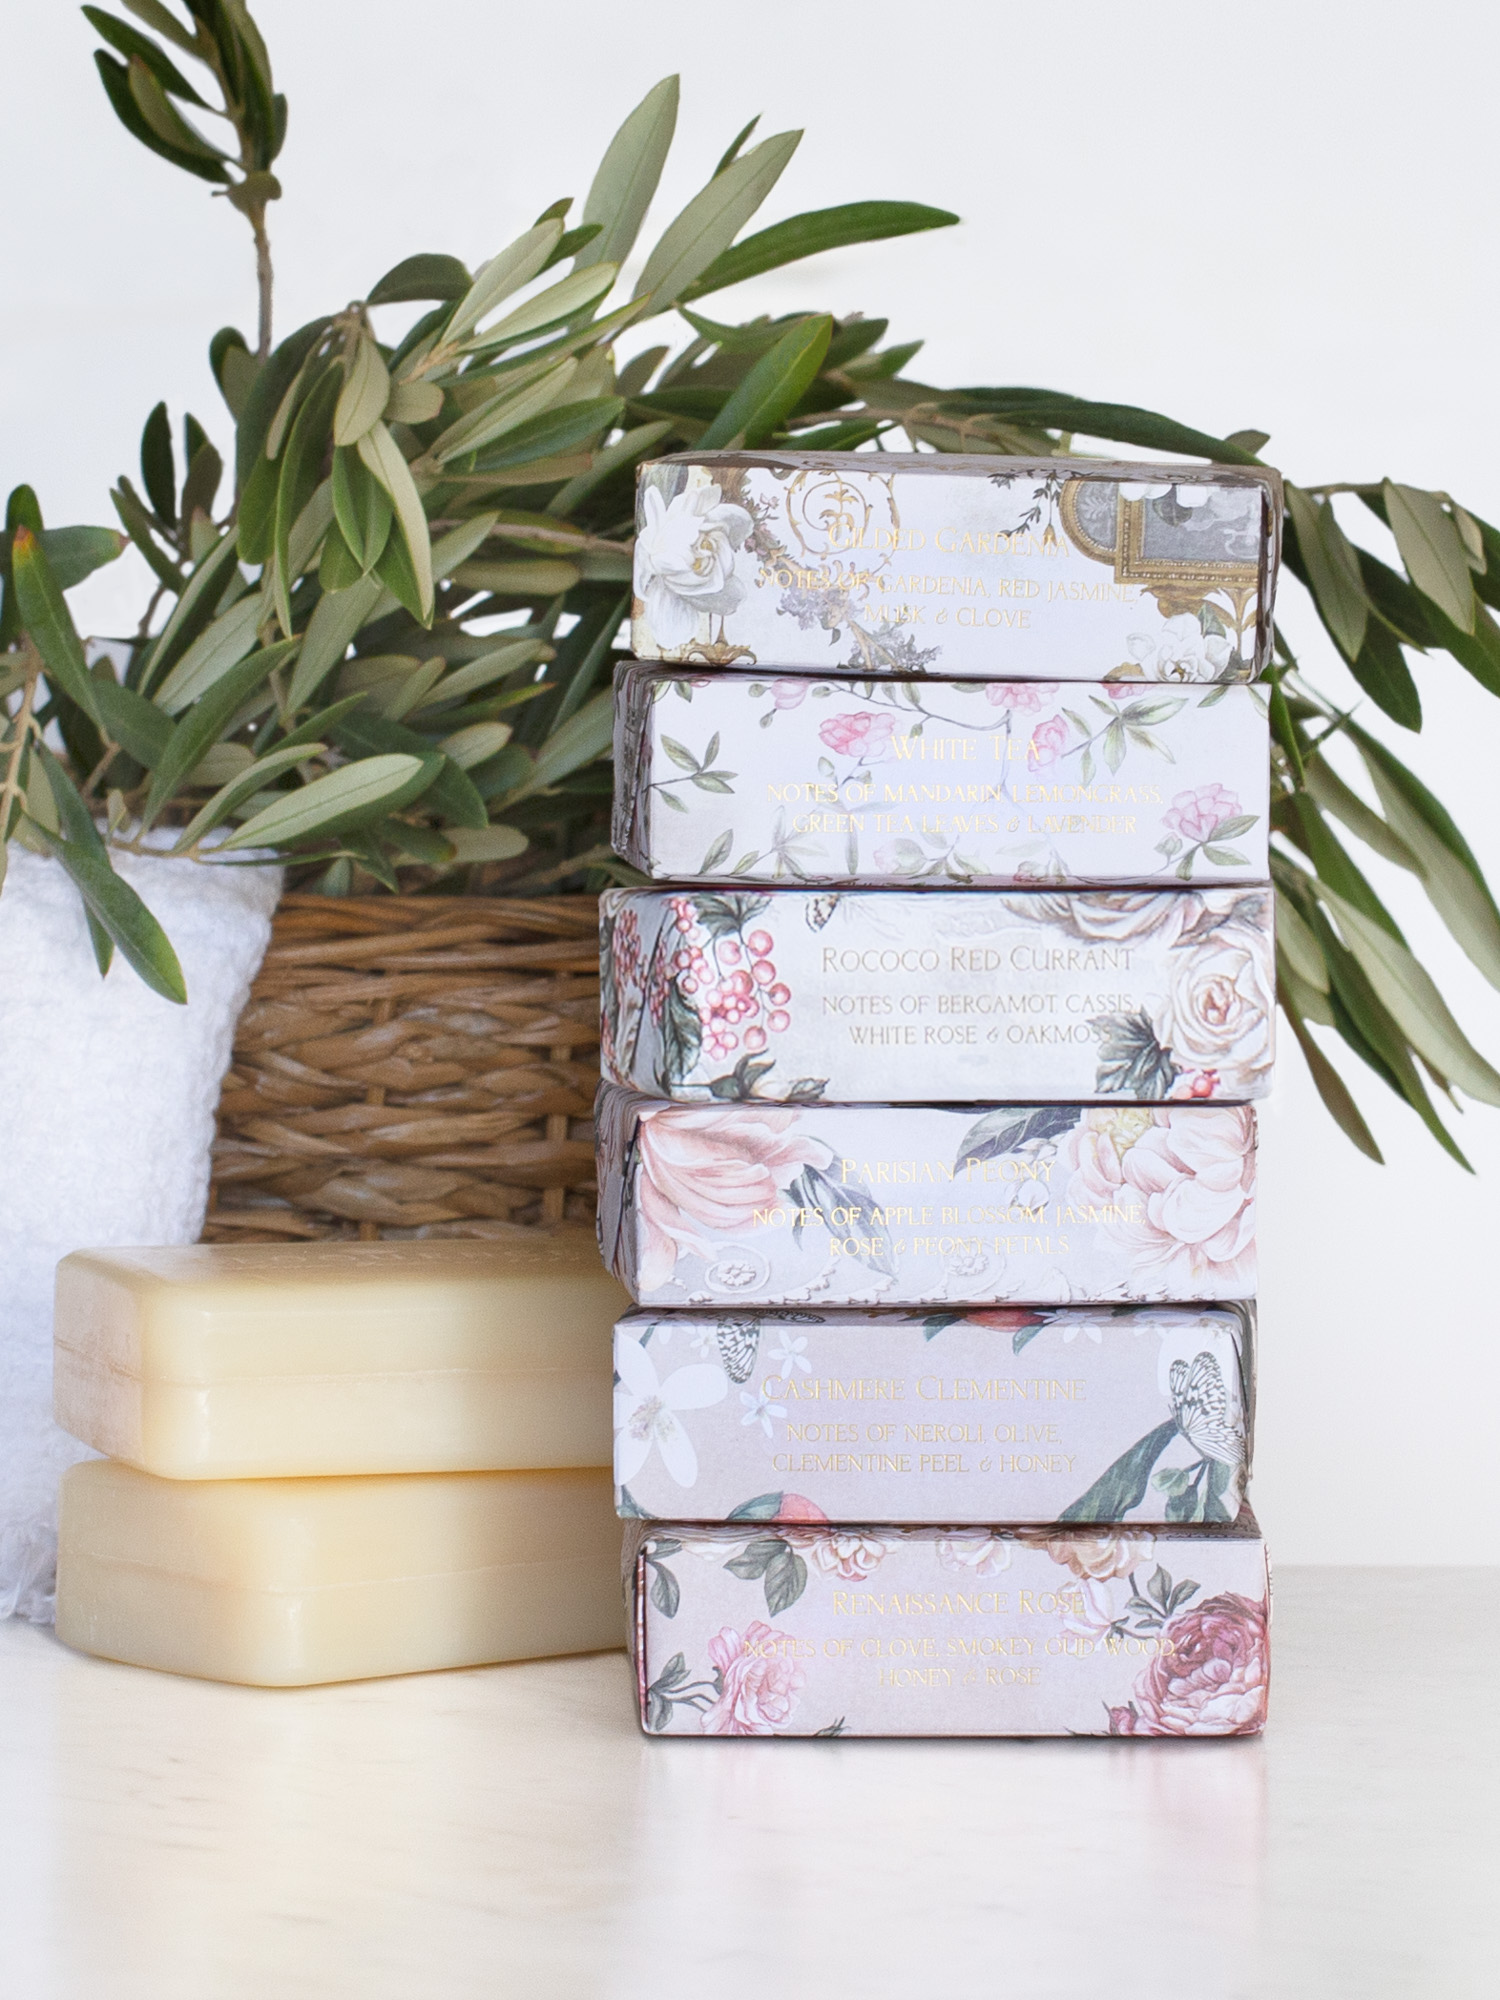 French milled soaps